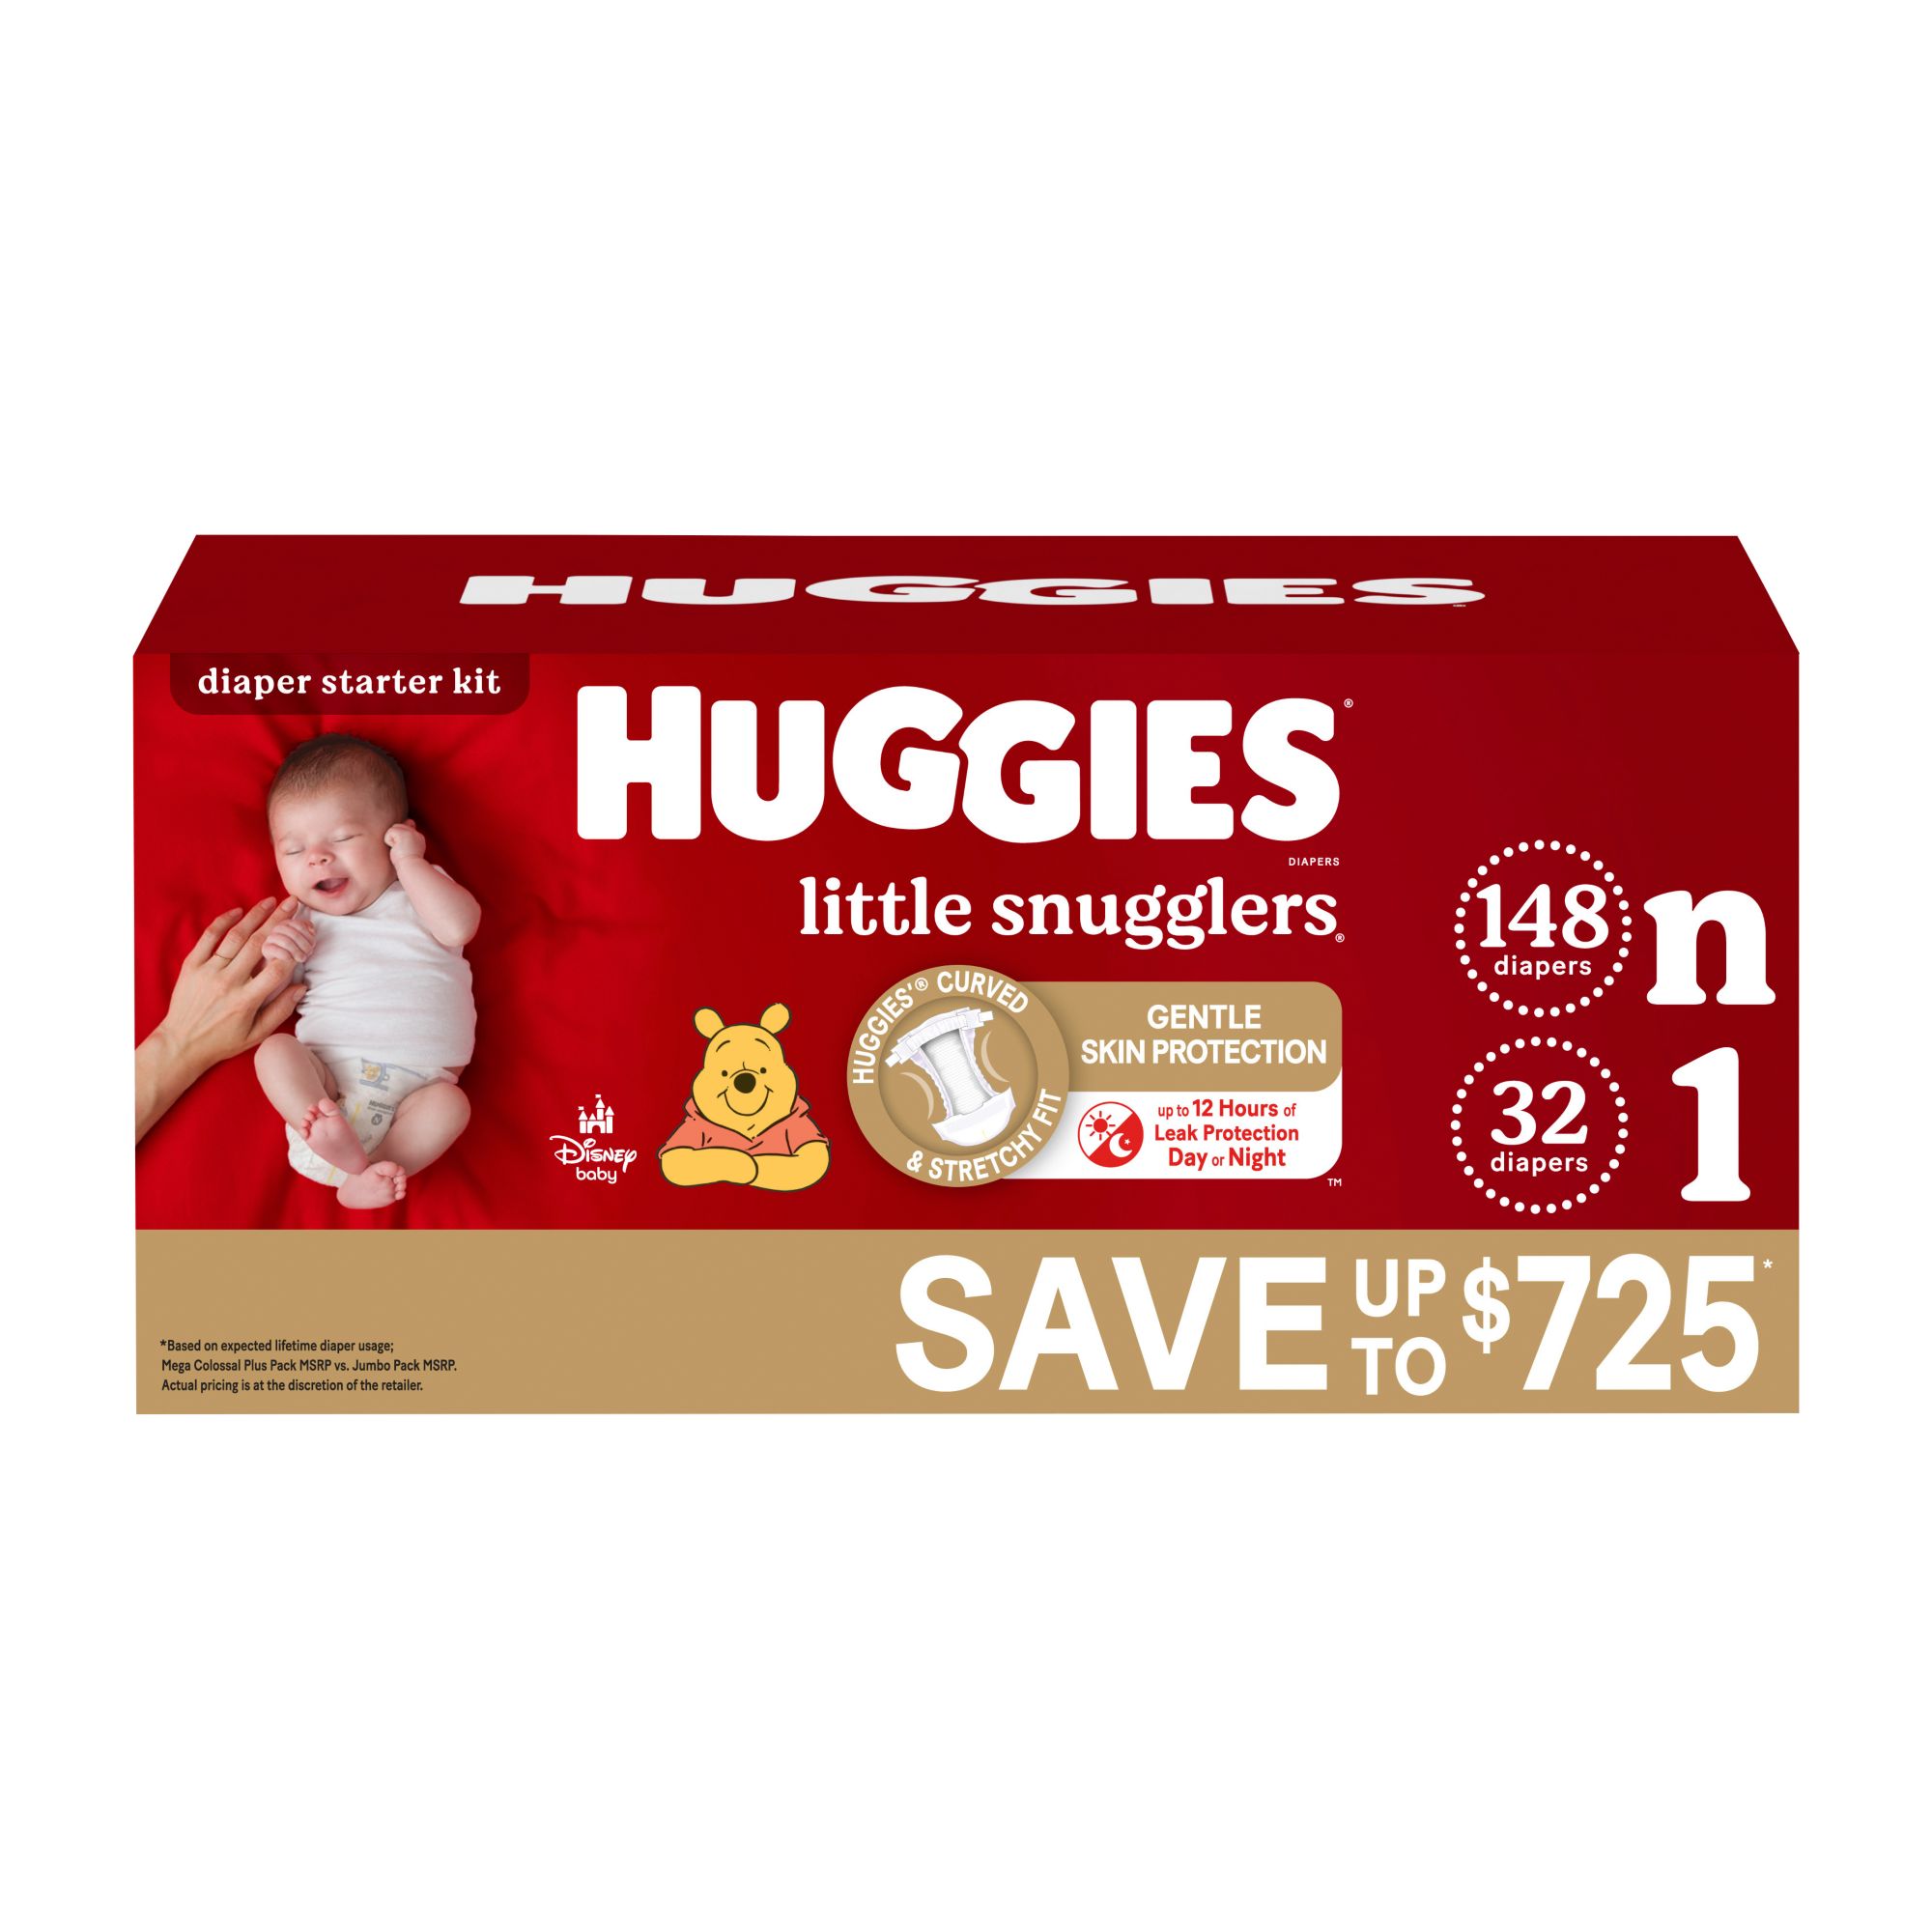 huggies diapers and wipes